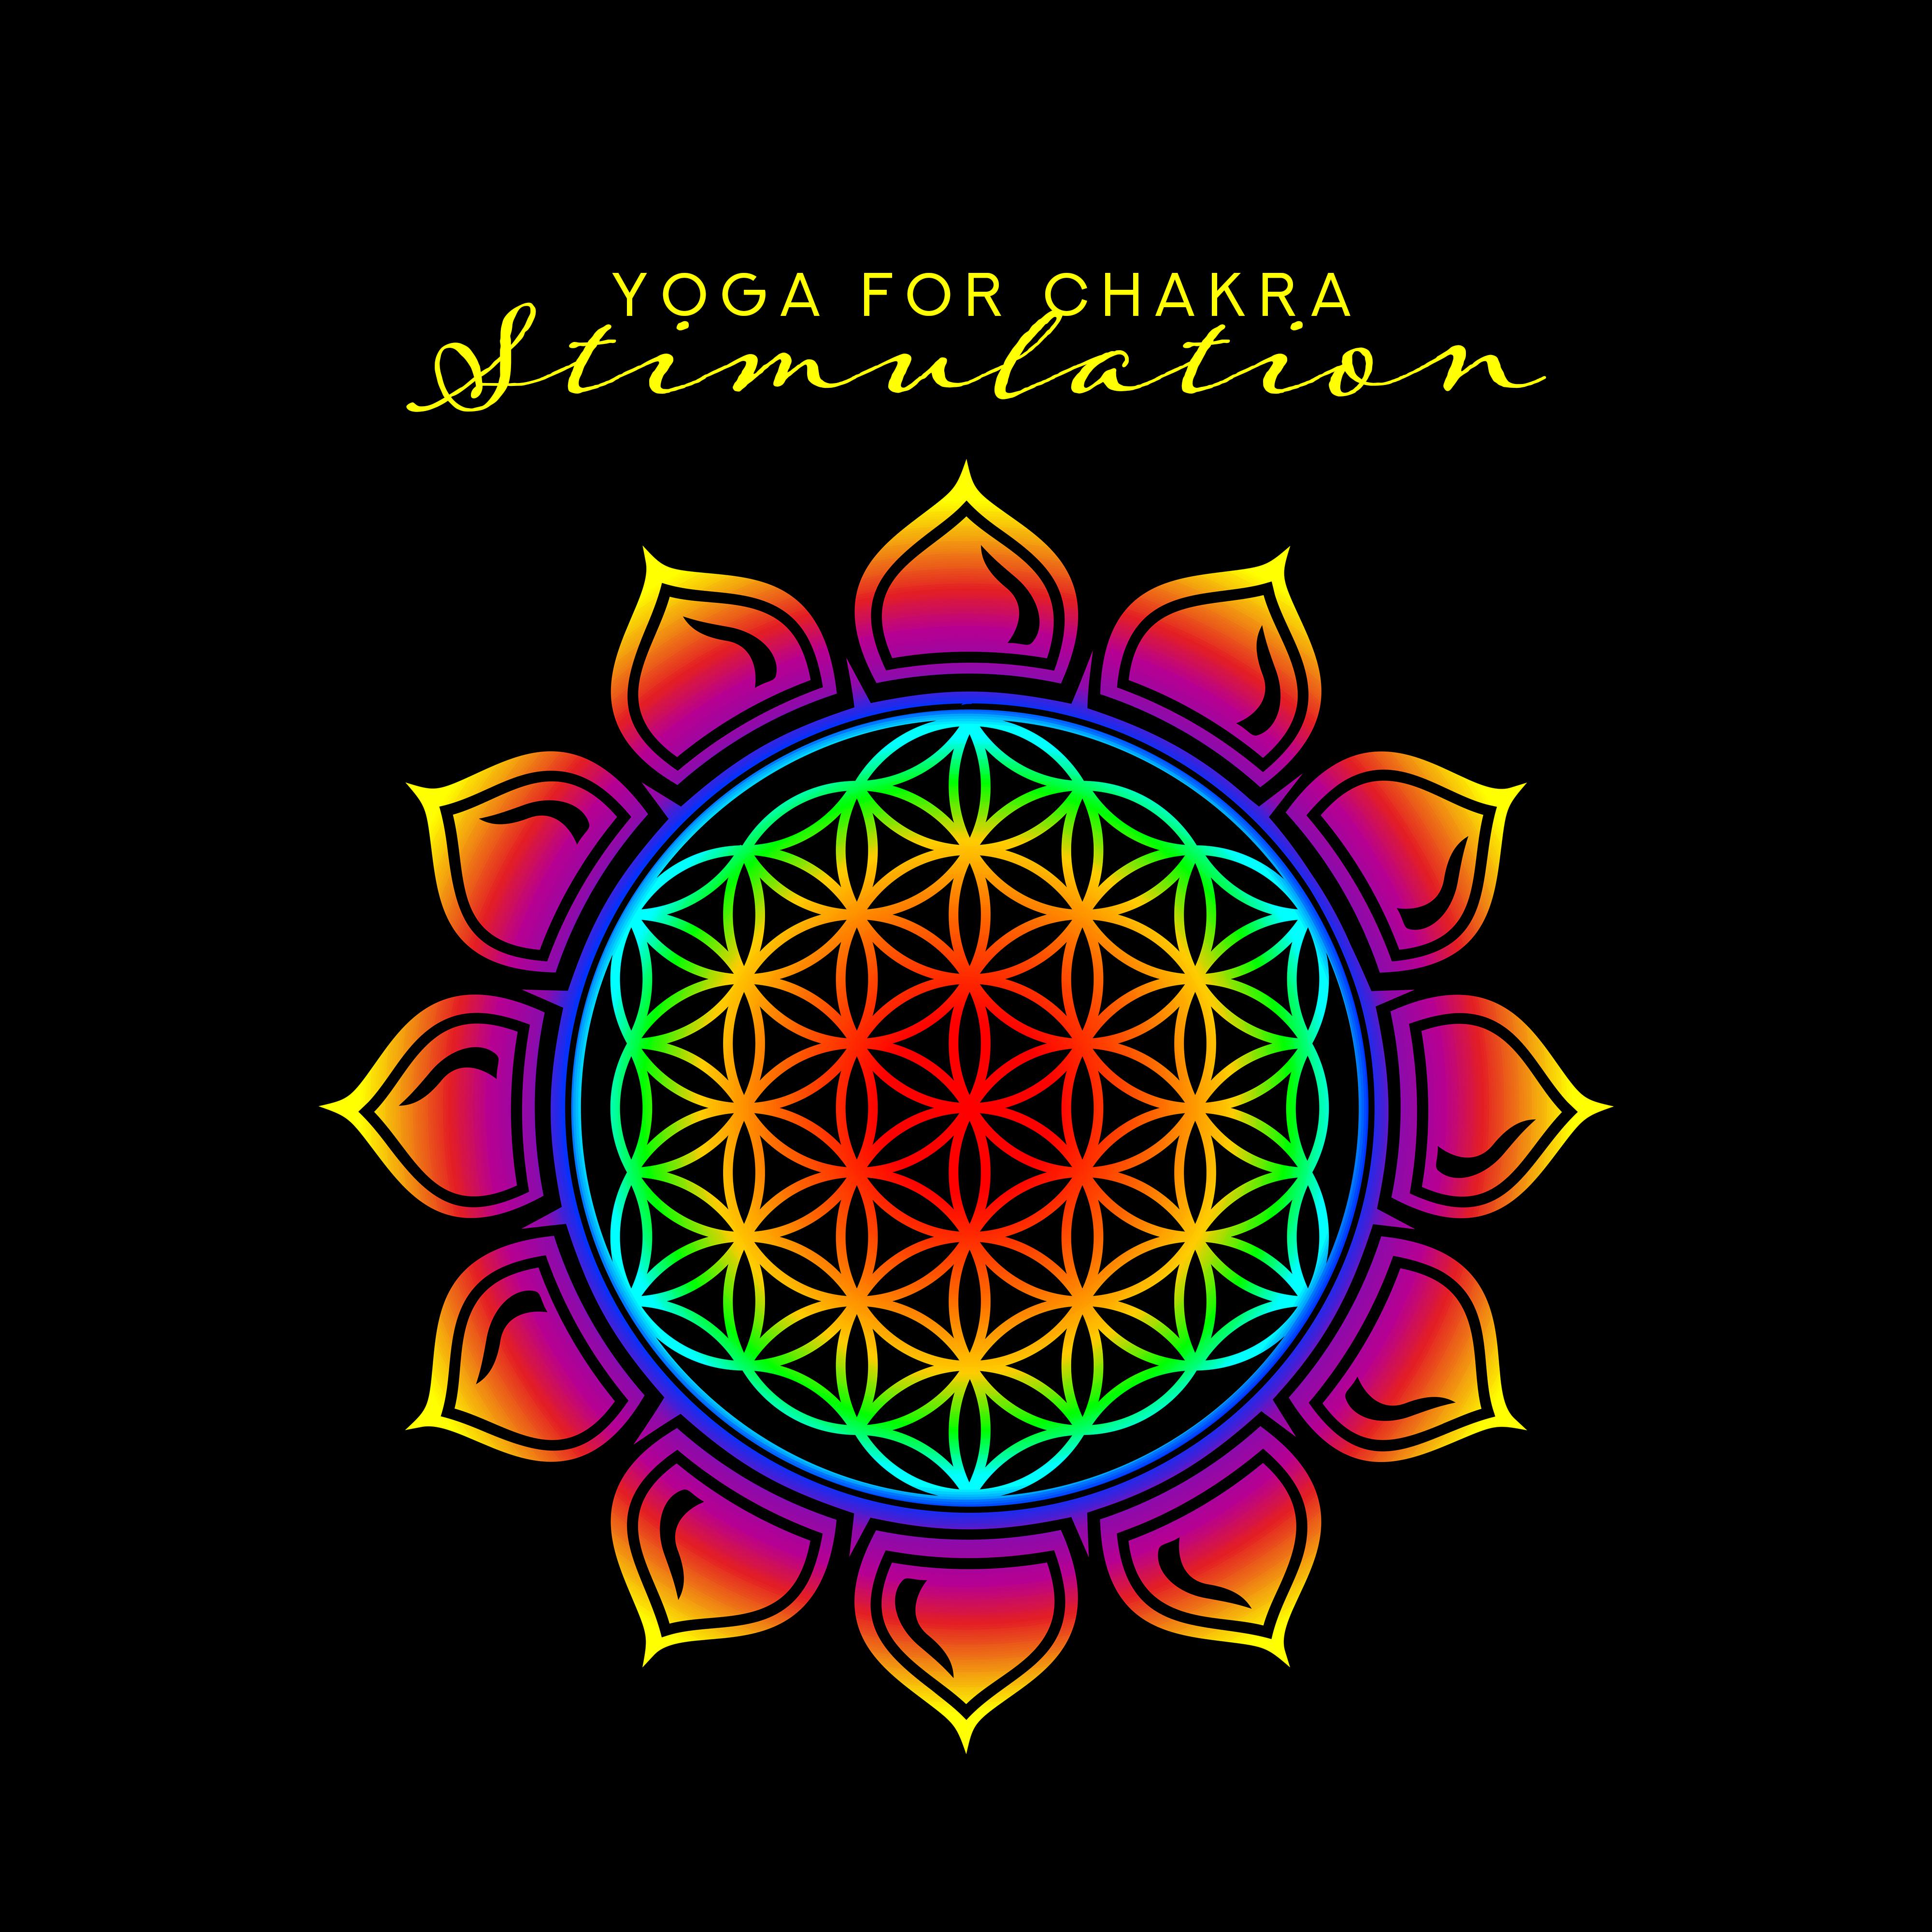 Yoga for Chakra Stimulation: New Age Ambient 2019 Music for Meditation & Relaxation, Third Eye Open, Tibetan Sounds, Internal Harmony, Inner Energy Increase